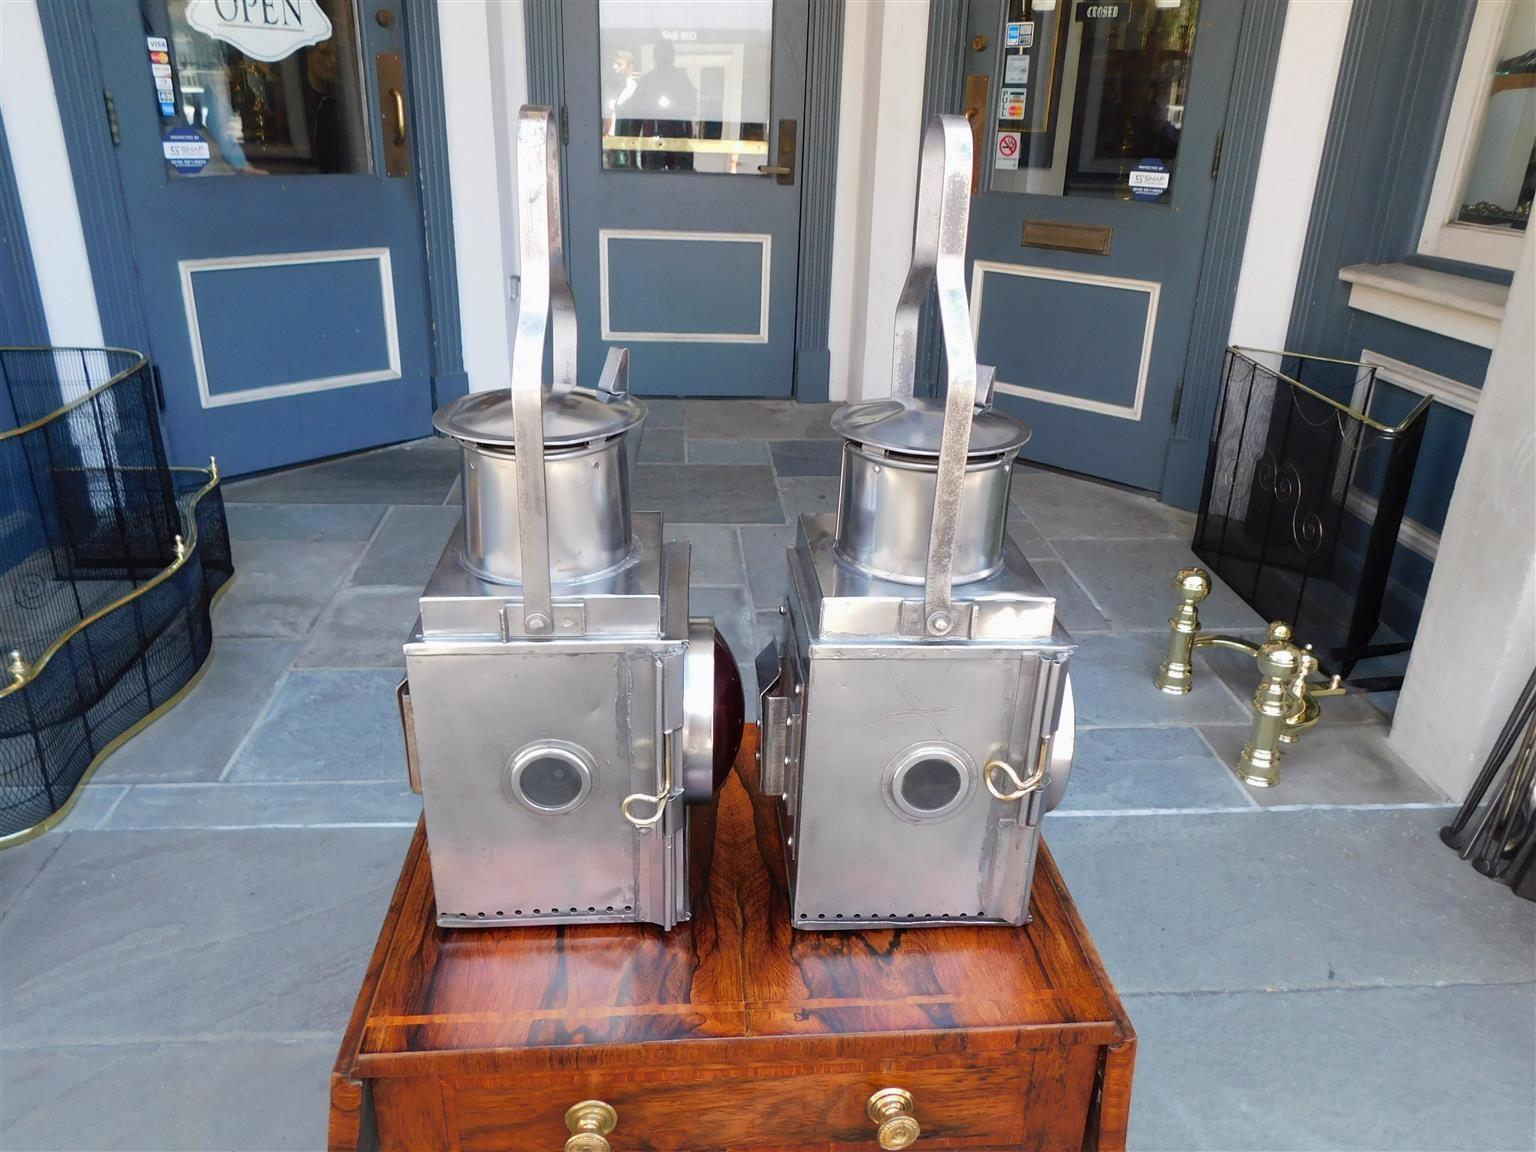 Pair of American Polished Steel and Fresnel Lense Railroad Lanterns, C. 1880 For Sale 3